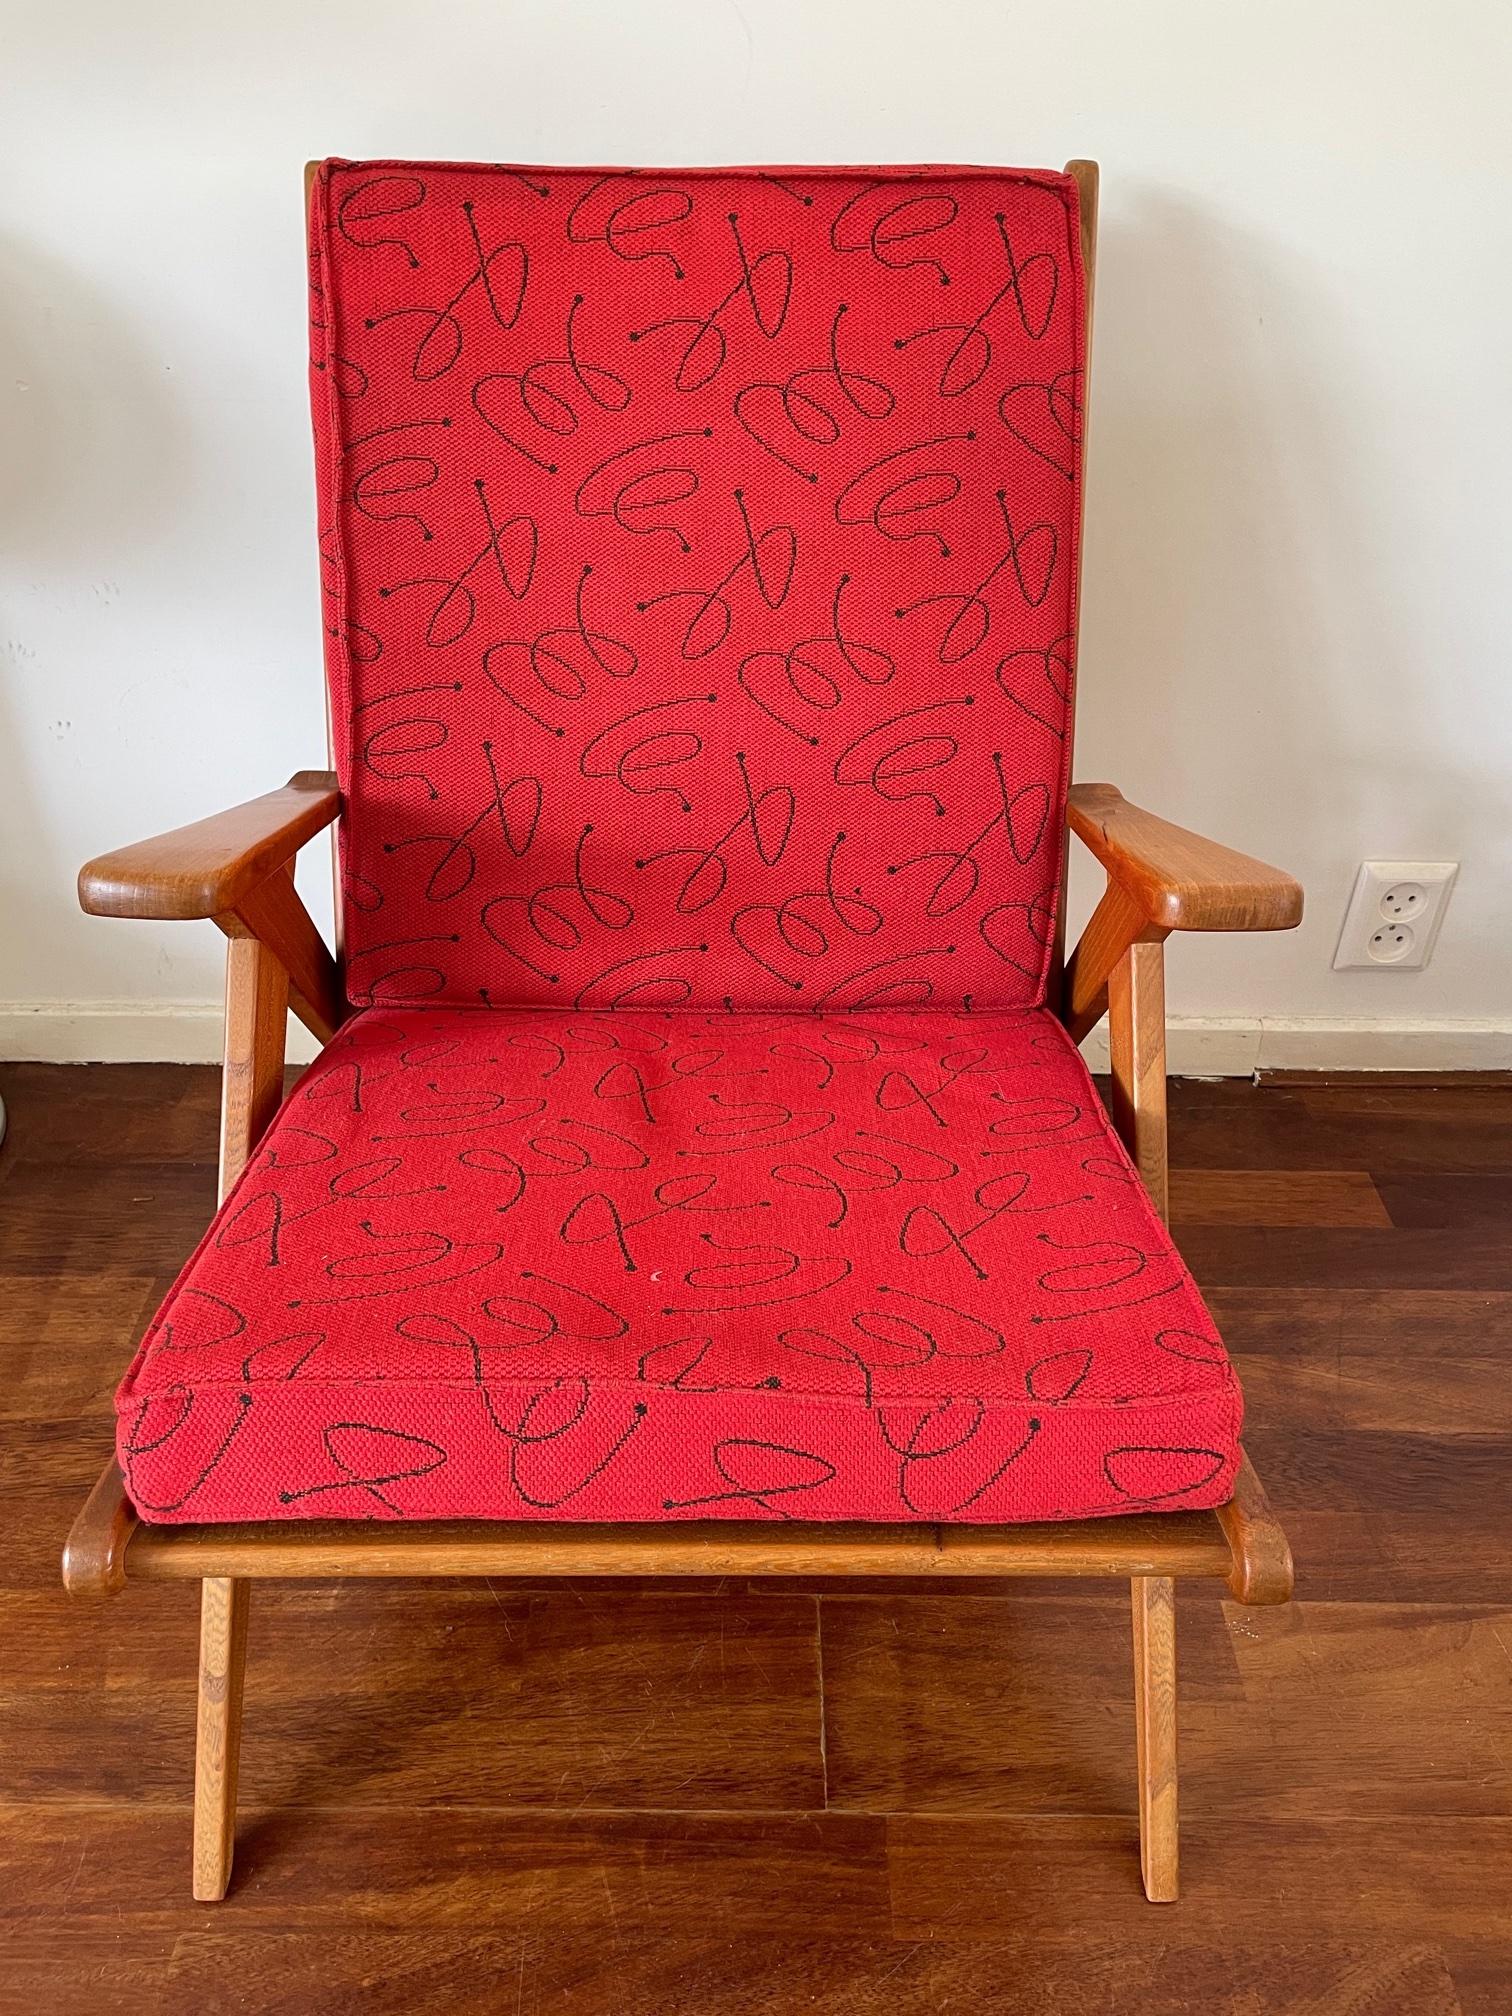 Cotton Vintage Red Danish Design Chair, Mid Century Wooden Chair, Original Fabric, 60's For Sale